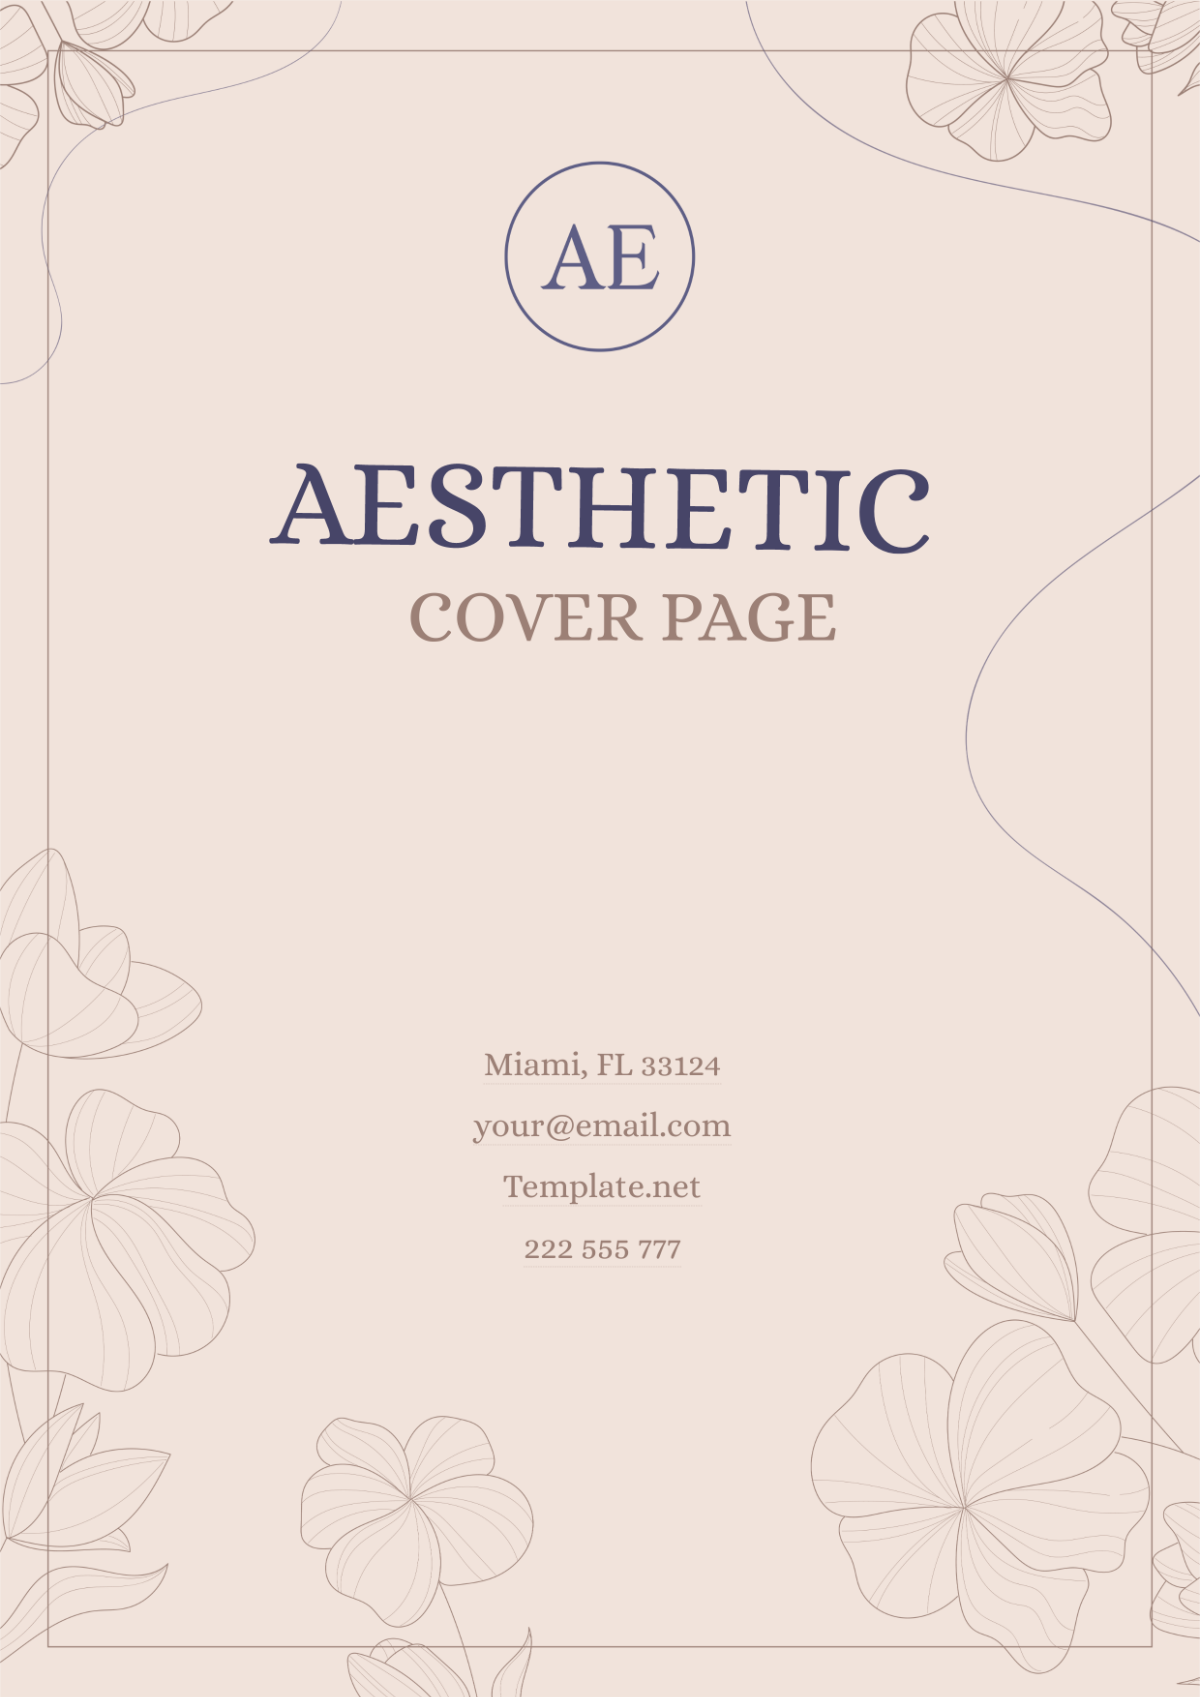 Aesthetic Cover Page